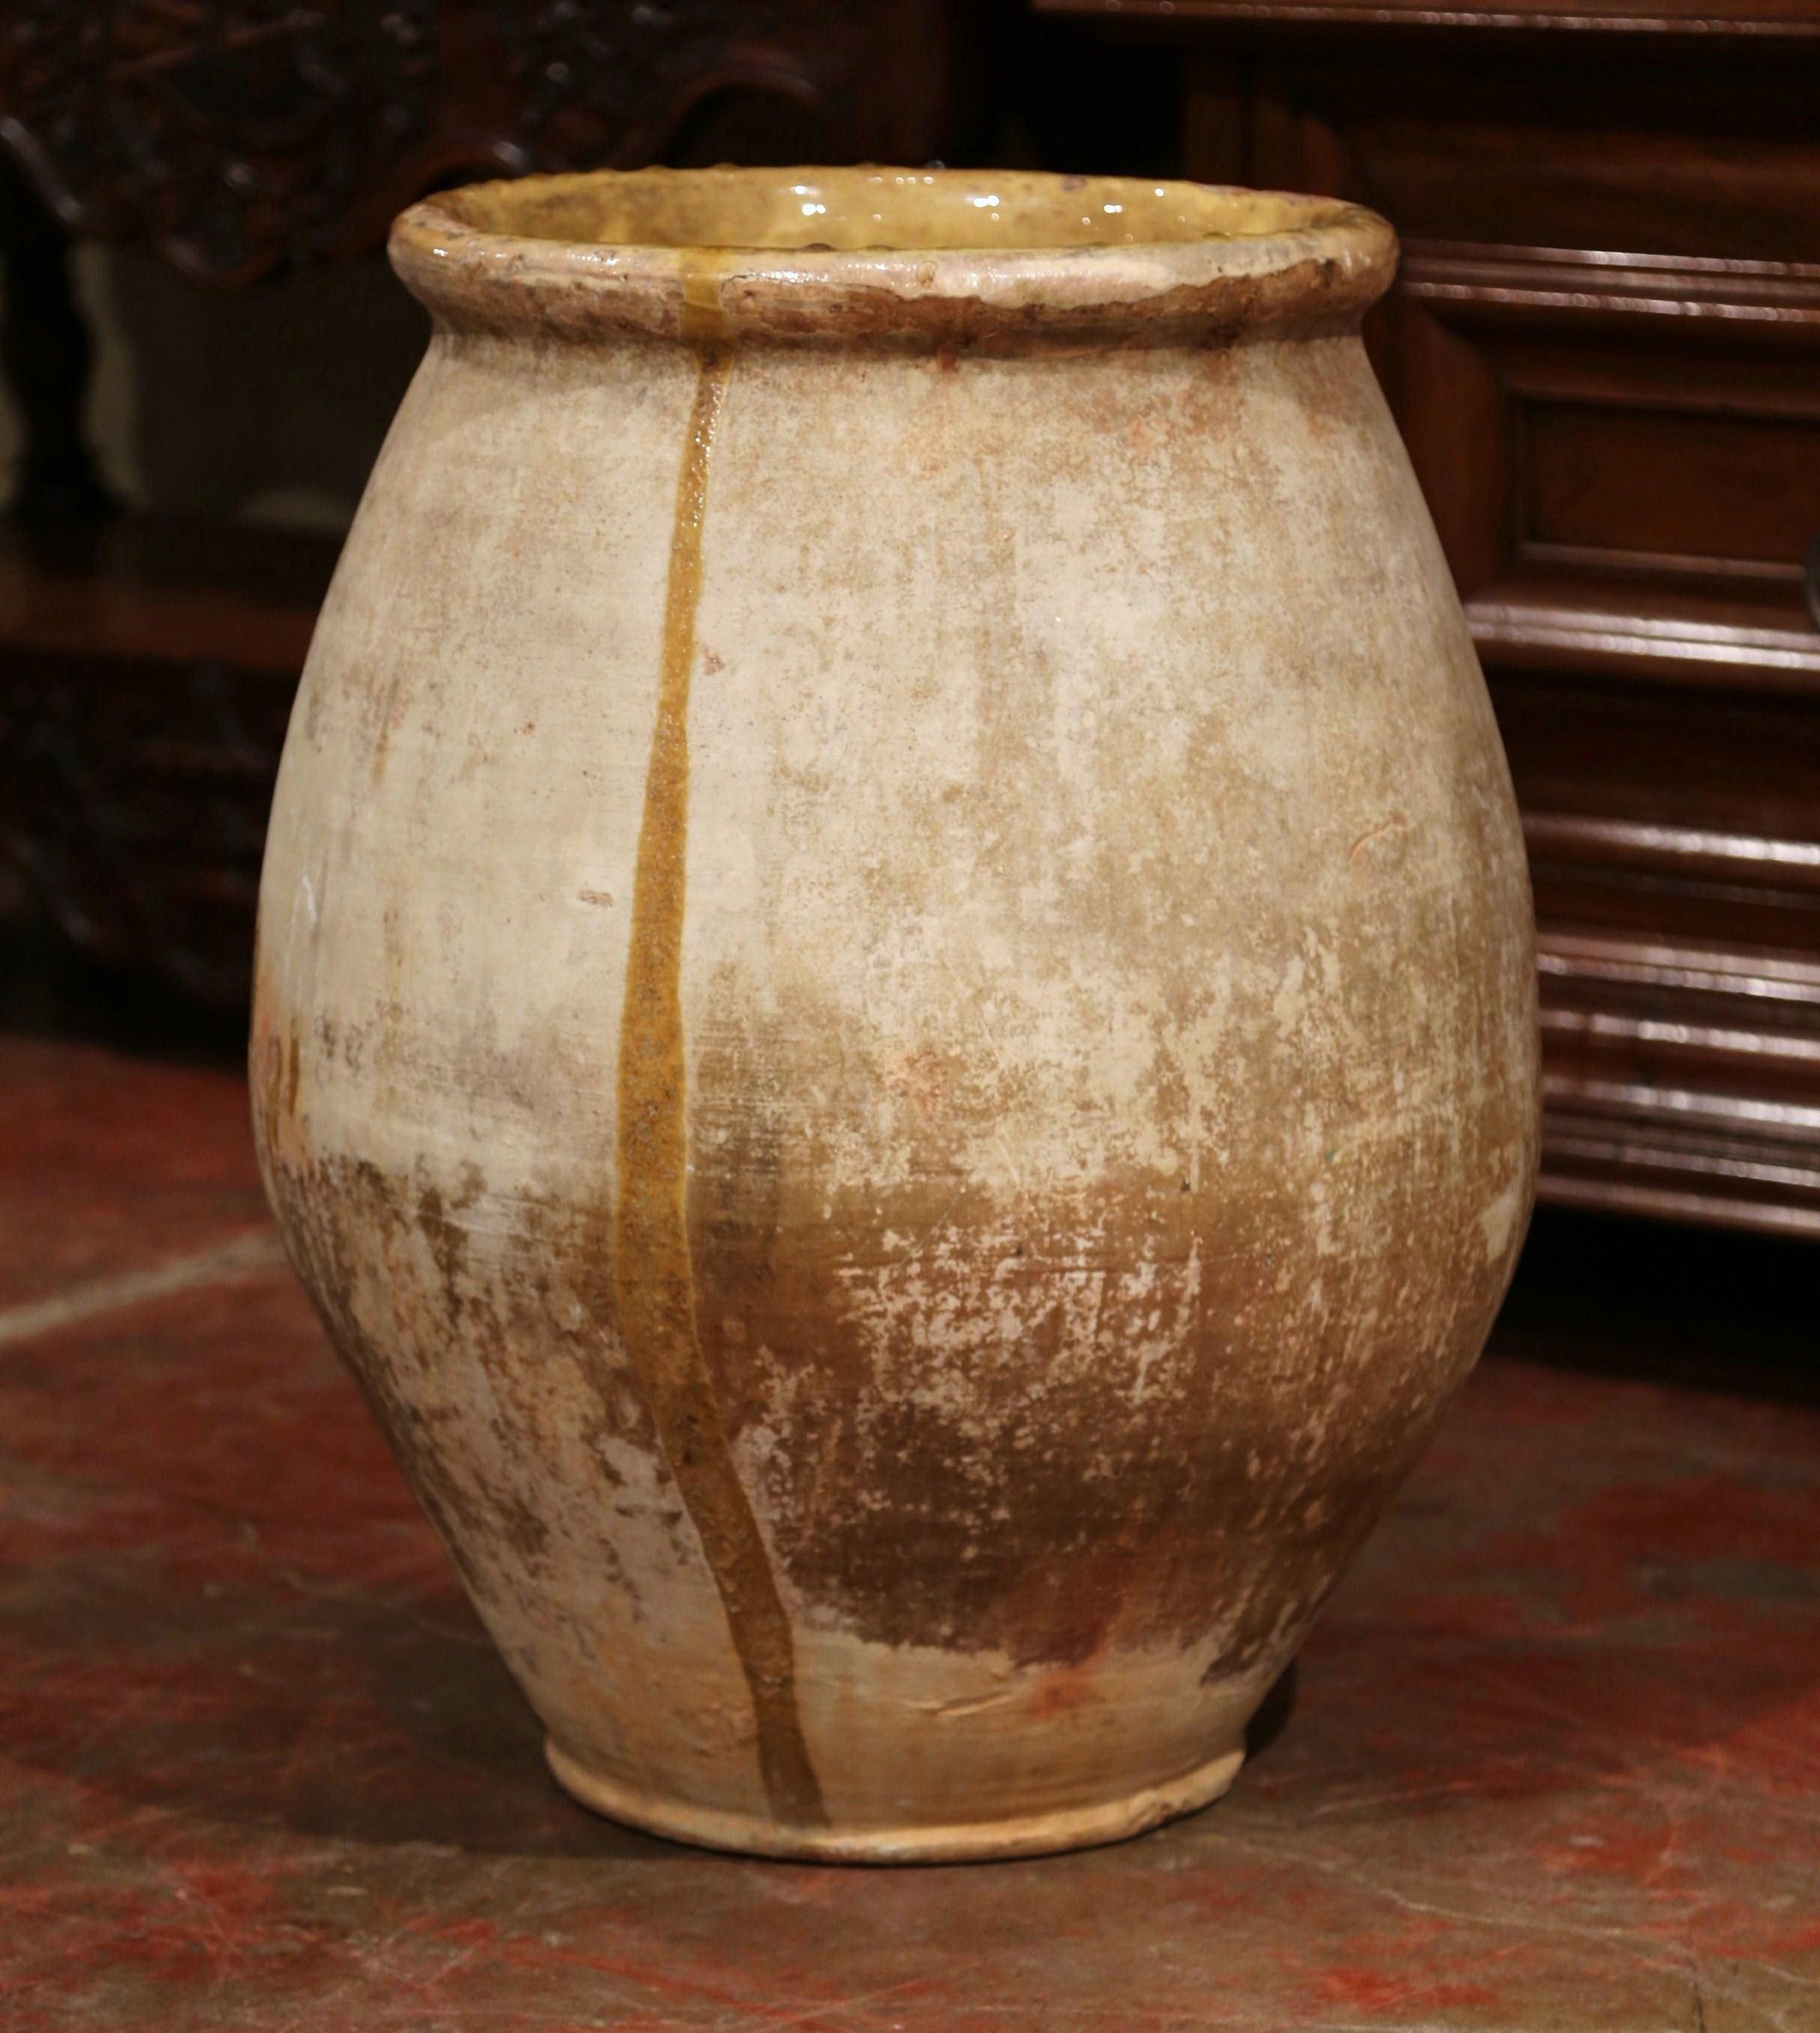 This large, antique earthenware olive jar was created in Southern France, circa 1870. Round in shape and made of blond clay, the terracotta pot features a yellow glaze around the neck and rim, and has a natural beige tone throughout the body.